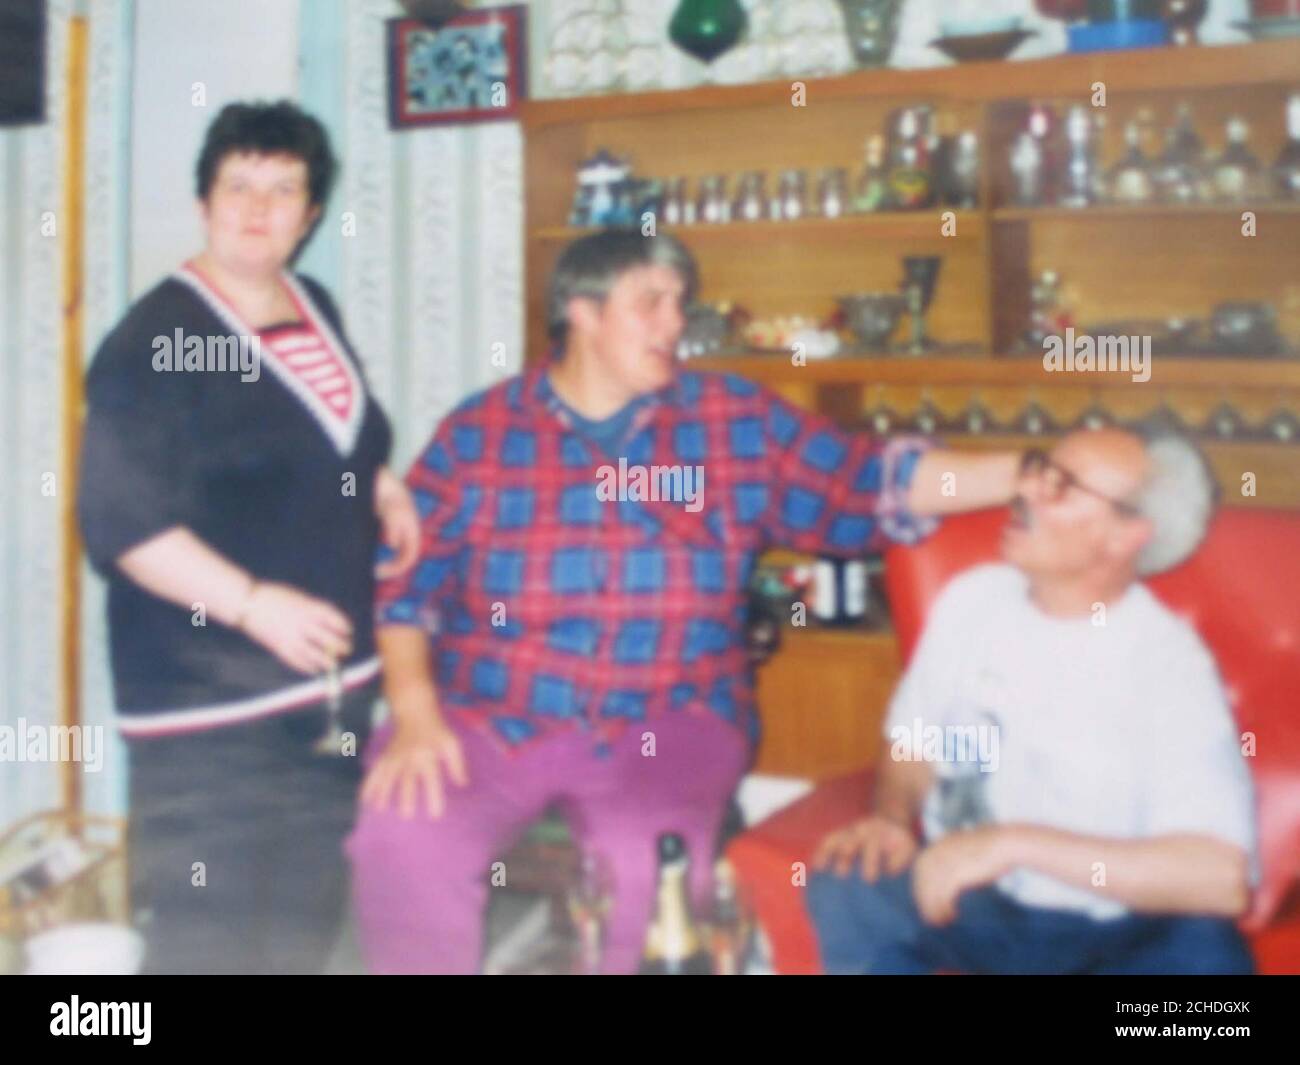 Best quality available. Collect photo dated October 1998 of (left to right) Rachel Jones (navy jumper with red stripes on neck), Avril Elms (red and blue checked shirt) and Robert Tamar (white t-shirt) in the ground floor flat where Mr Tamar and Miss Jones lived at Fivefields Close, Winchester. Stock Photo